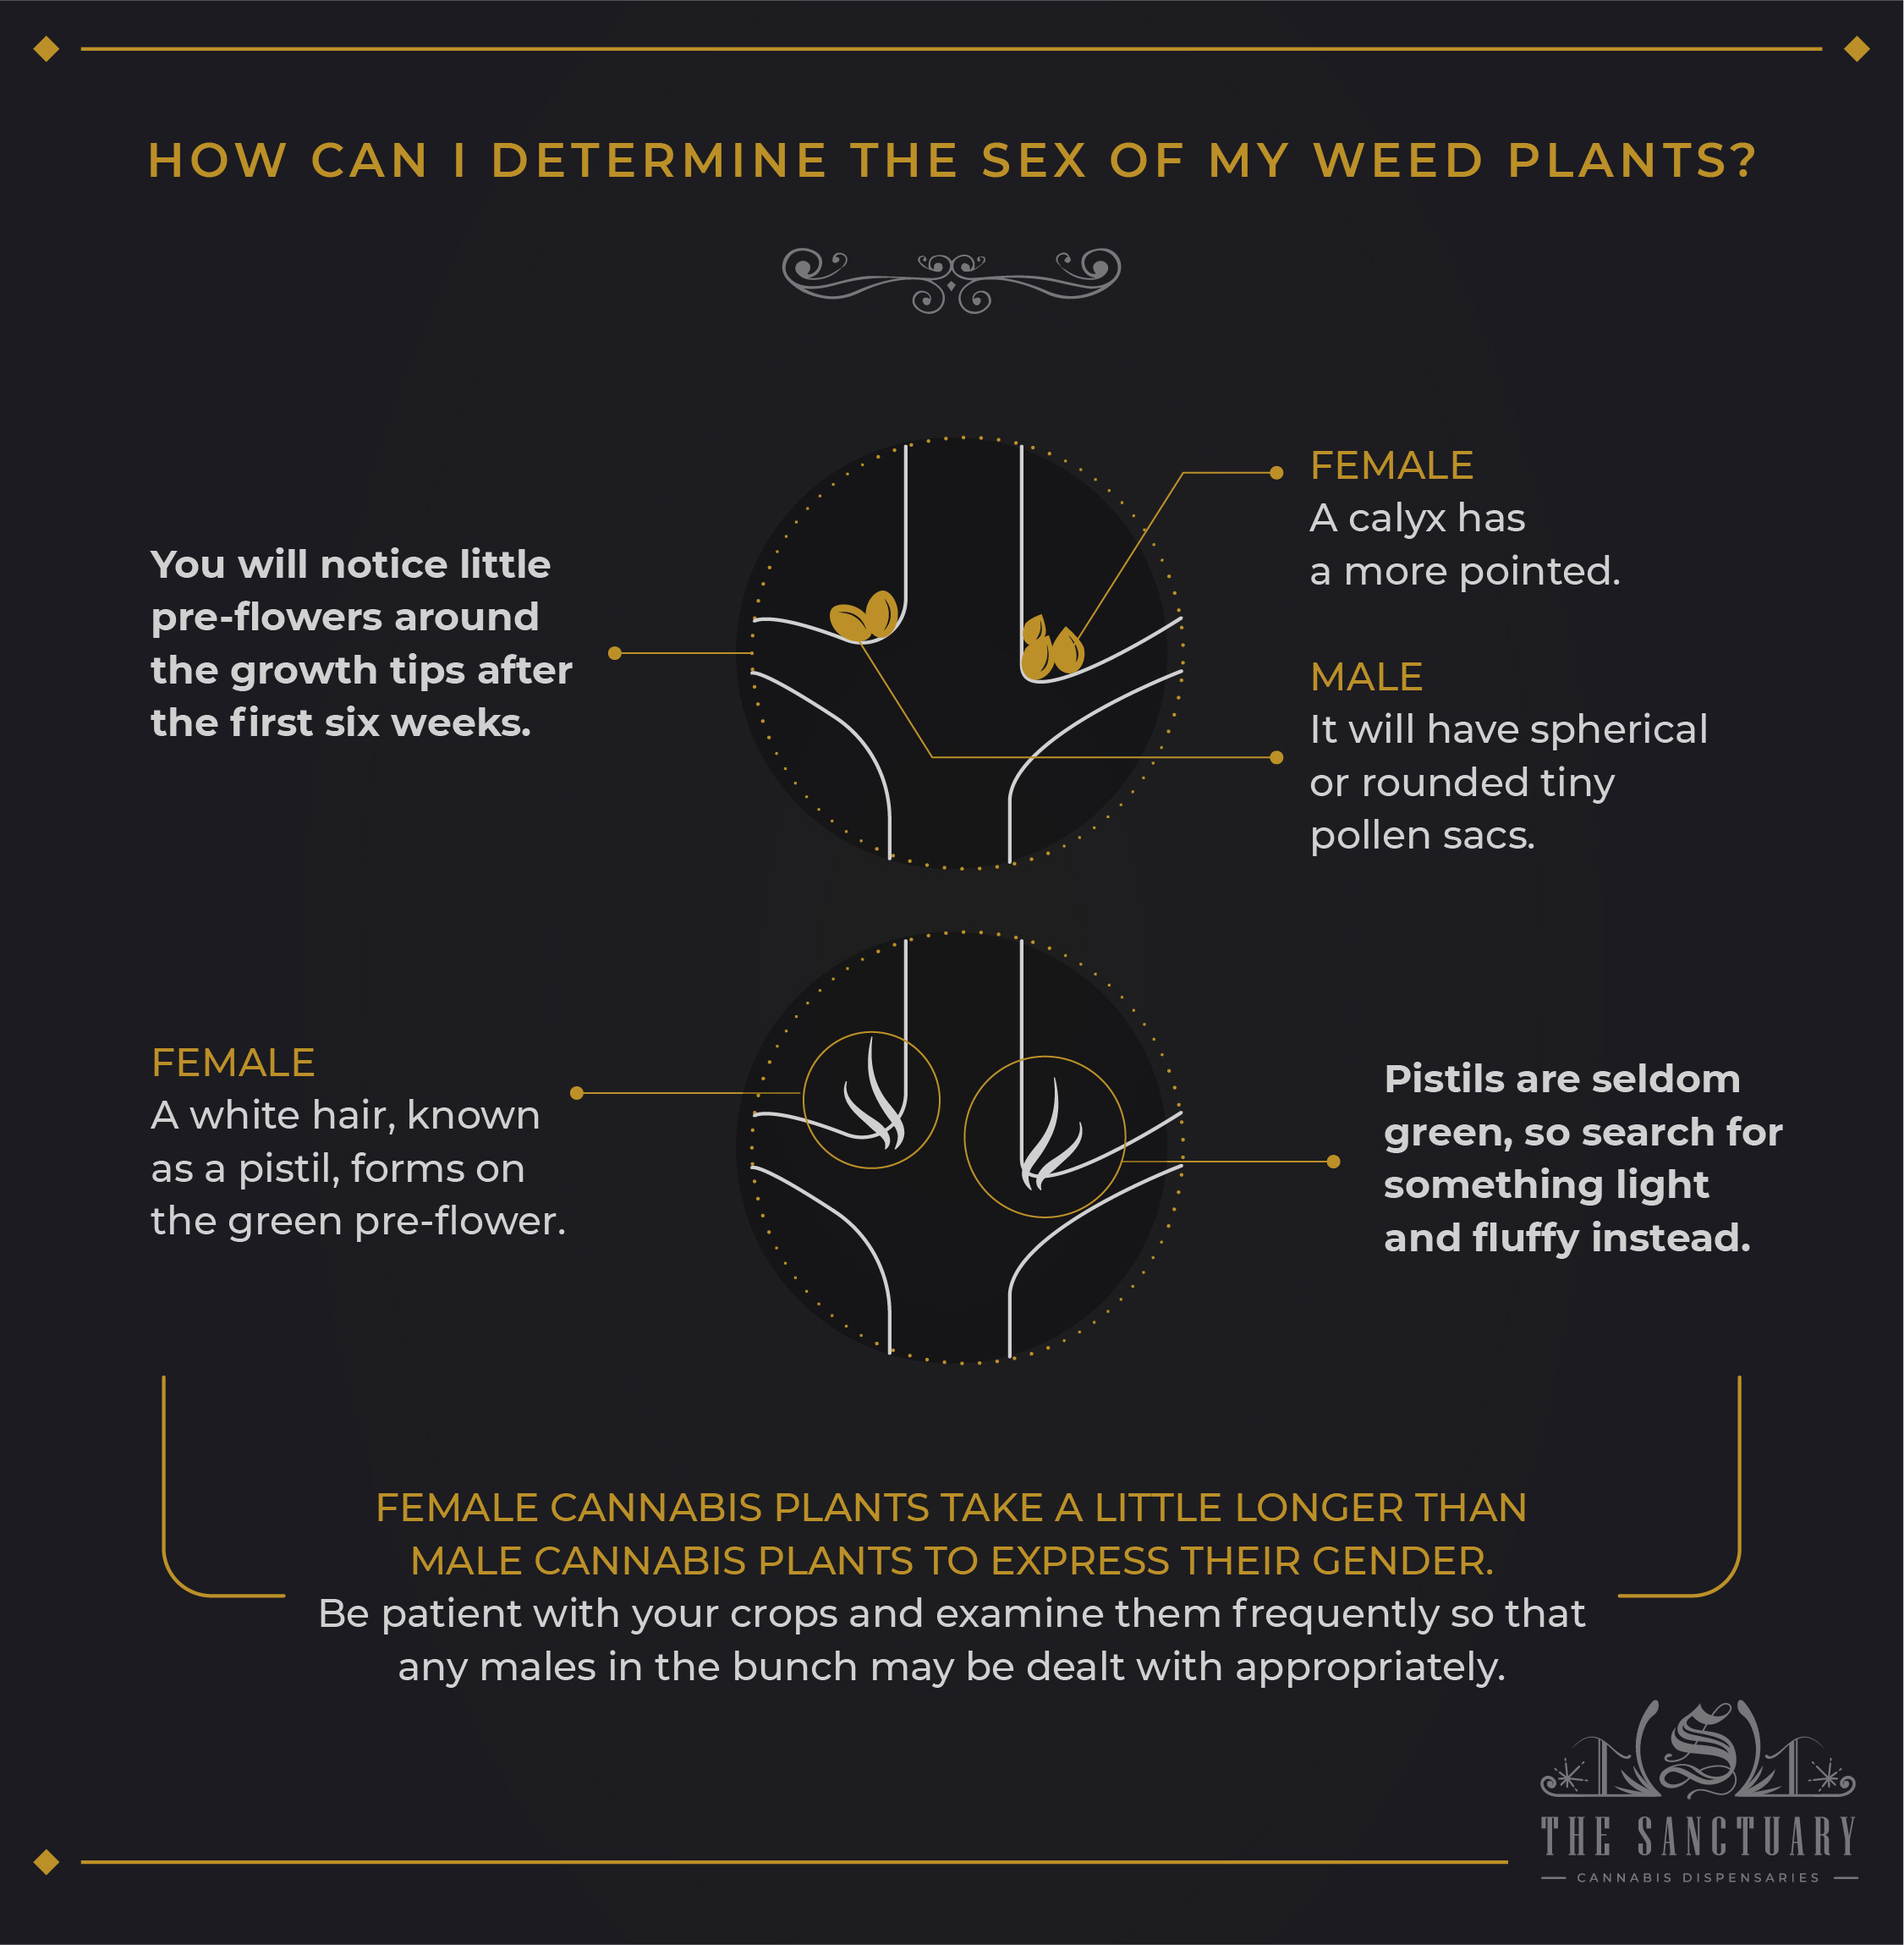 How can I determine the sex of my weed plants